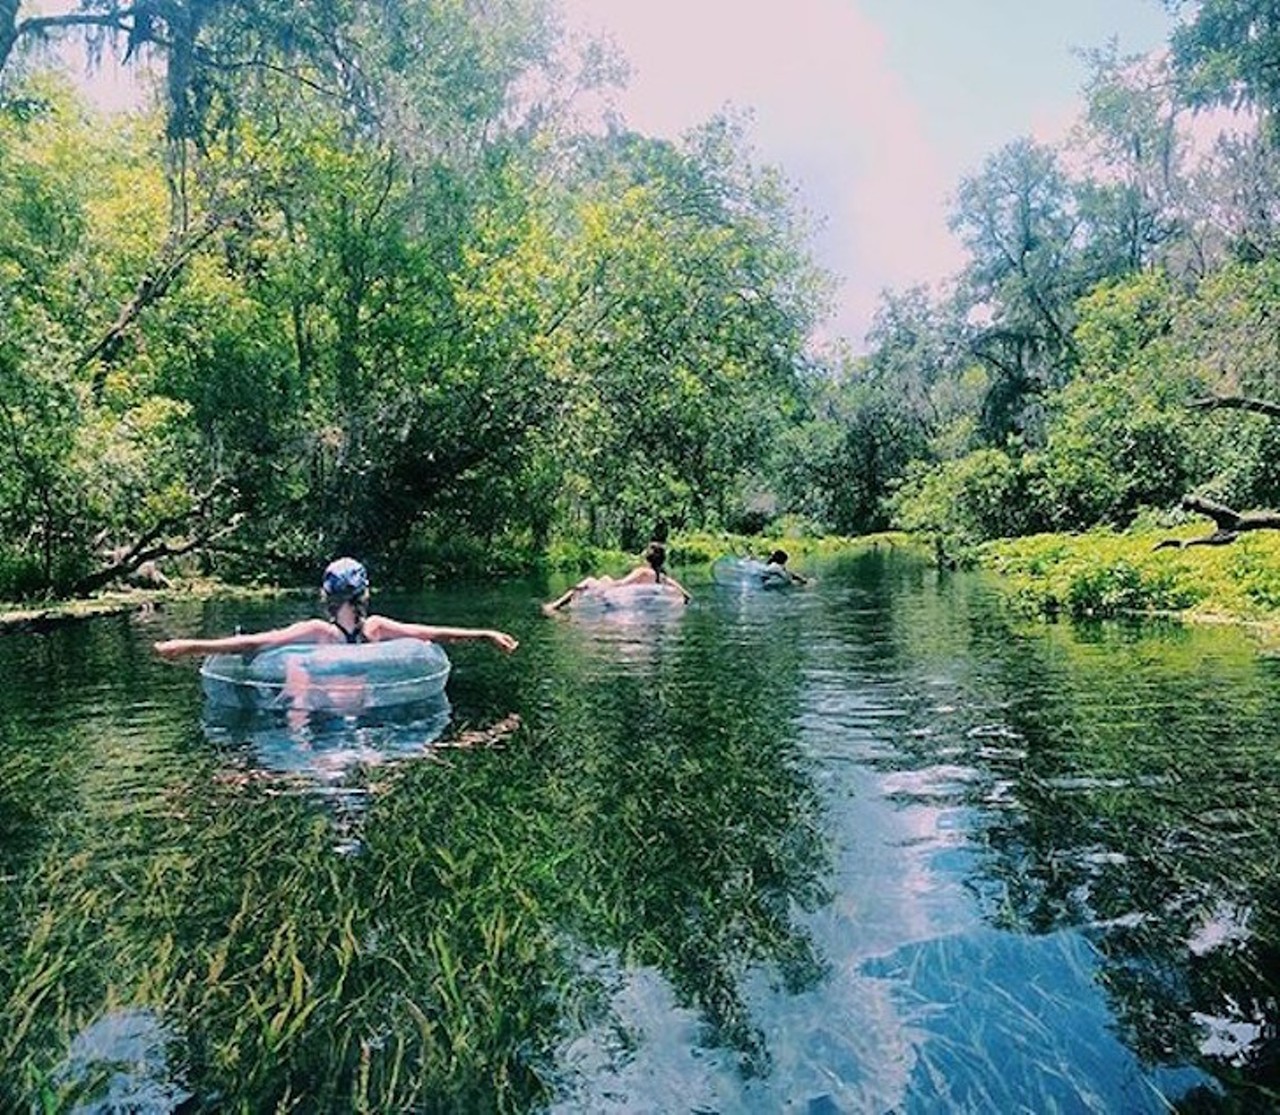 Ichetucknee Springs State Park
12087 SW U.S. Highway 27, Fort White, 386-497-4690
Distance: About 2 hours and 15 minutes from Orlando
Photo via ashleysherlock/Instagram